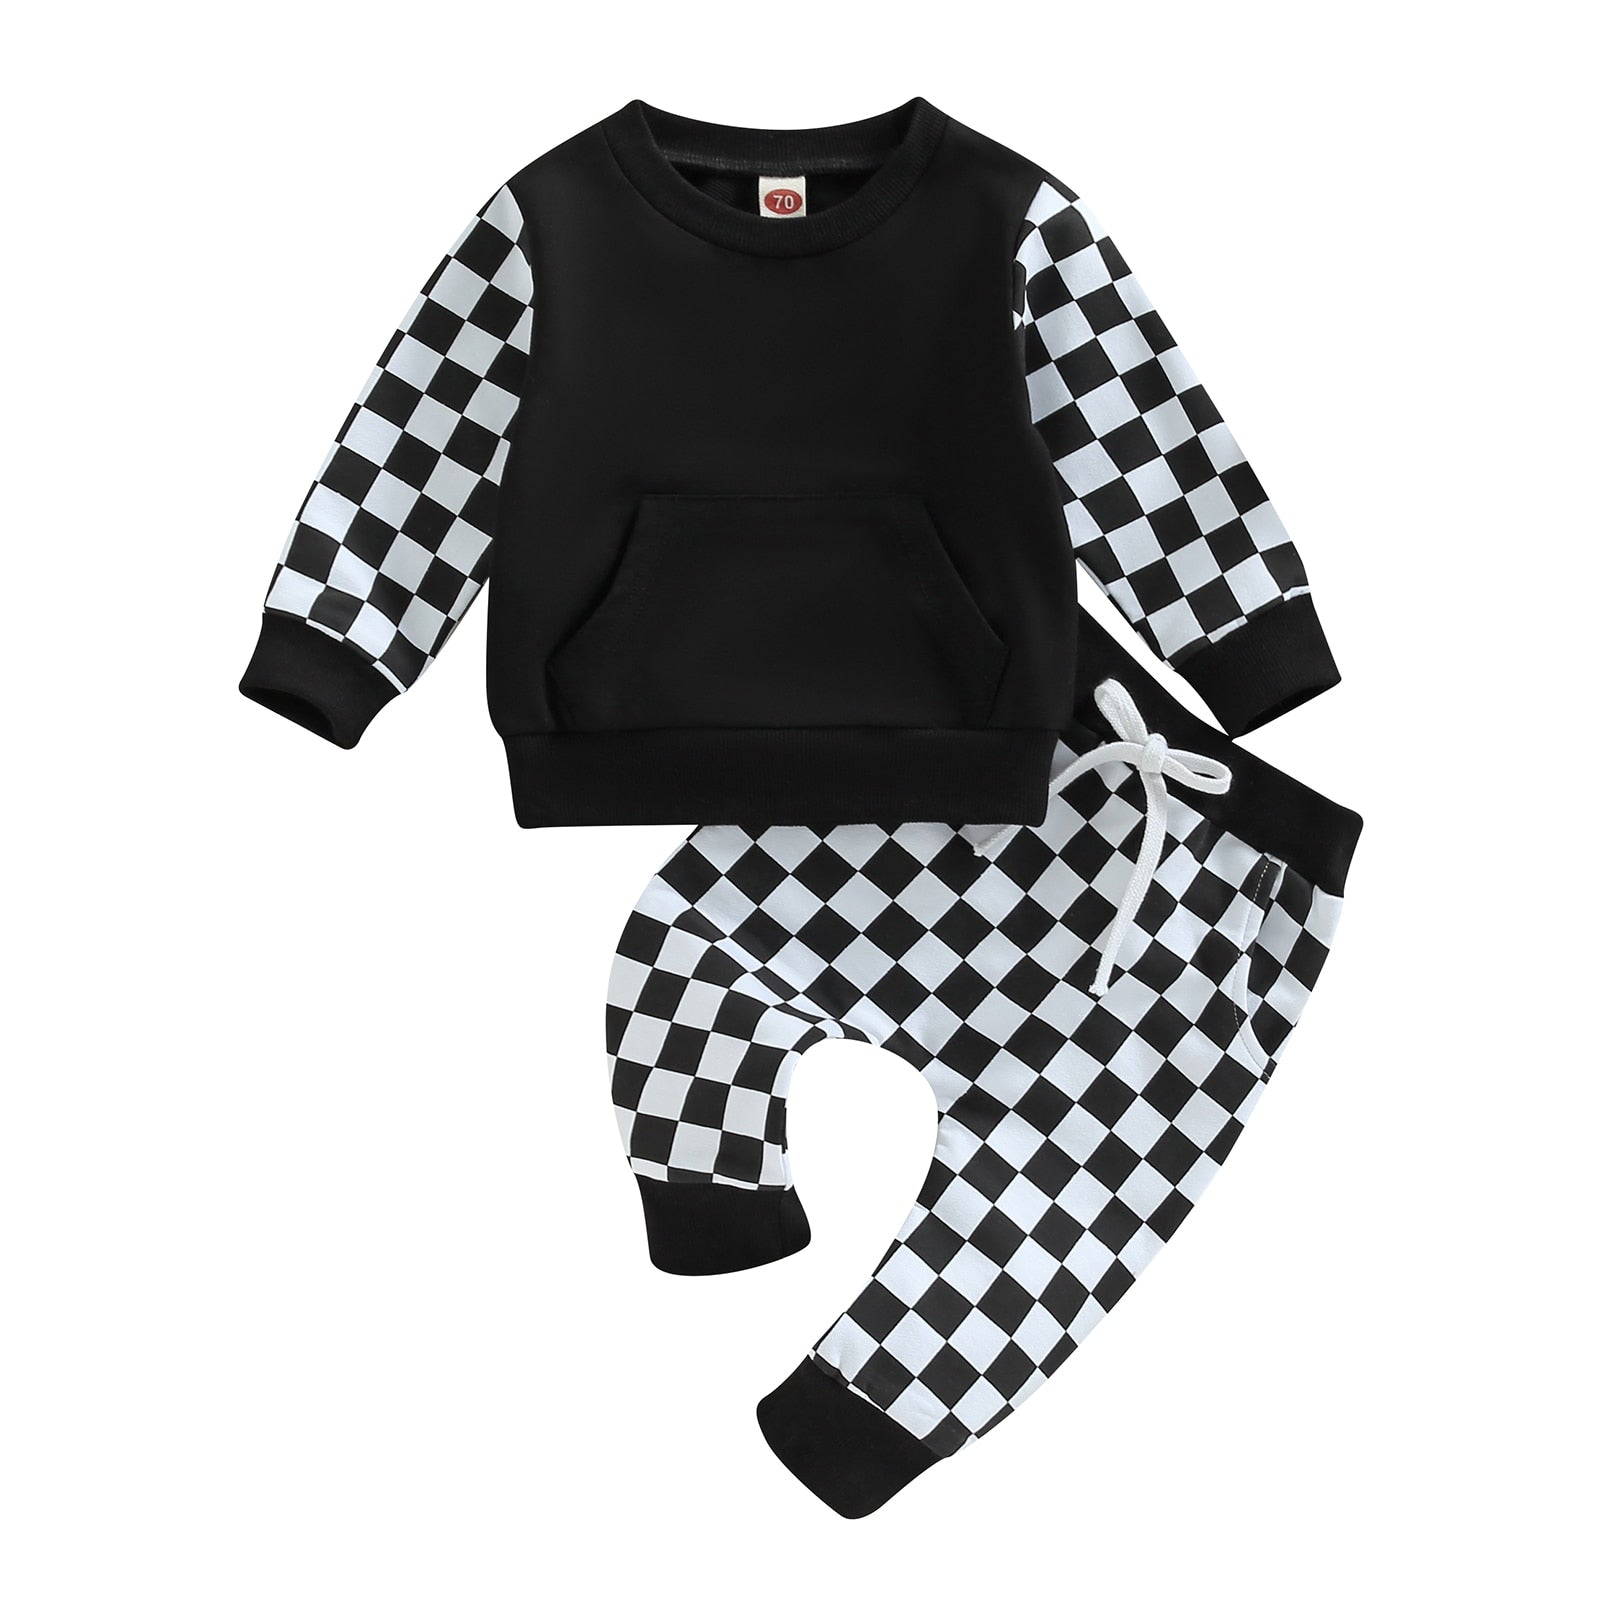 Adorable Spring Set for Boys: Letter Cow Head Sweatshirt and Trousers